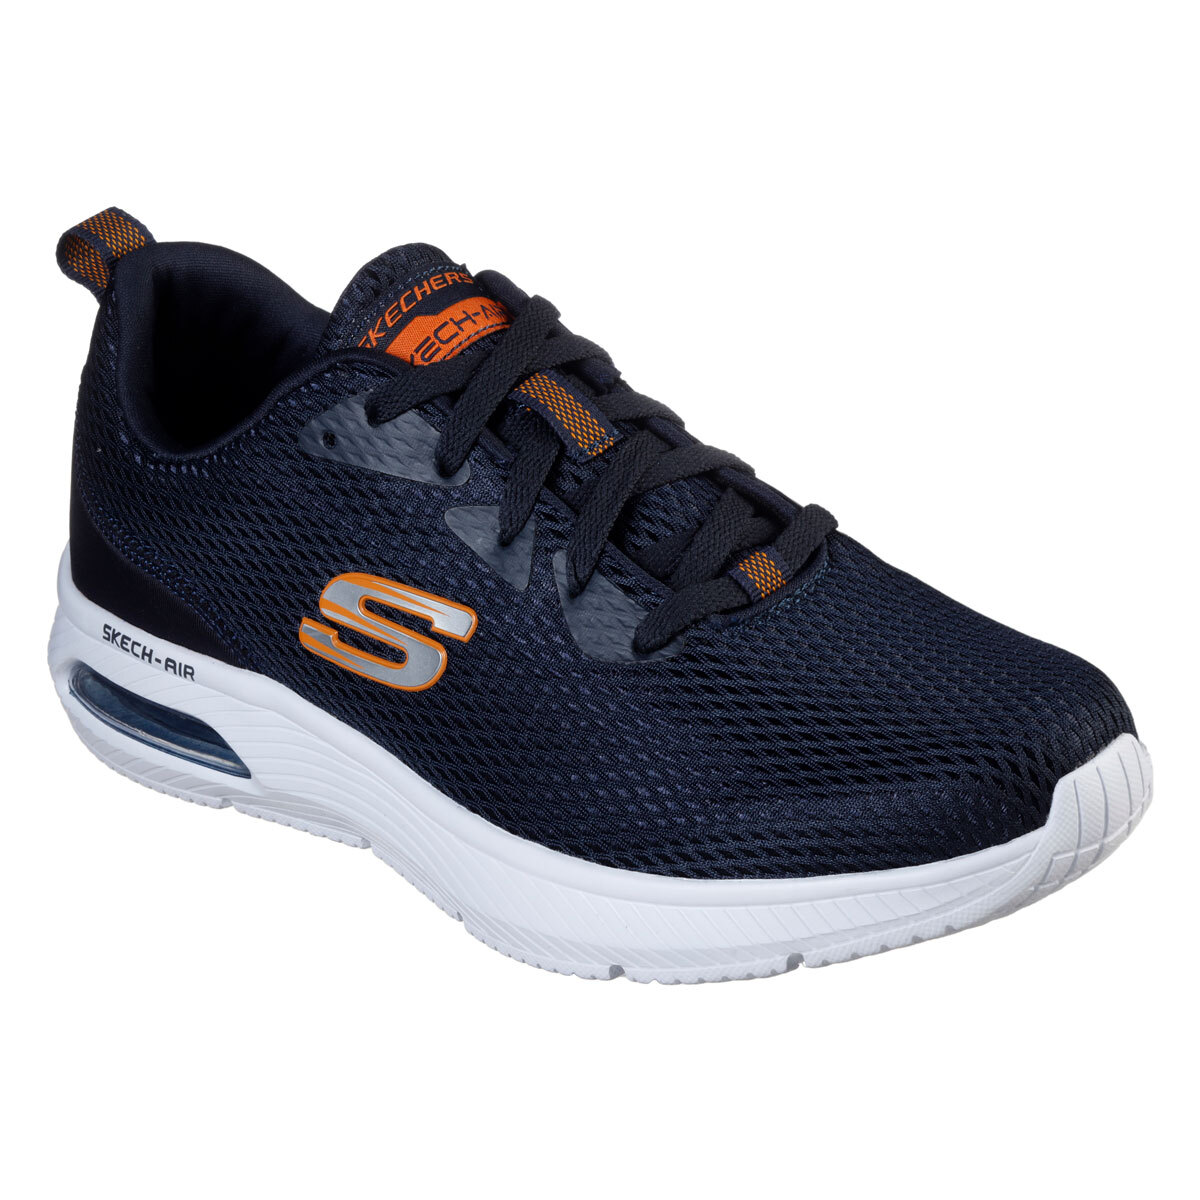 Skechers Dyna Air Men's Shoes in Navy, Size 10 UK